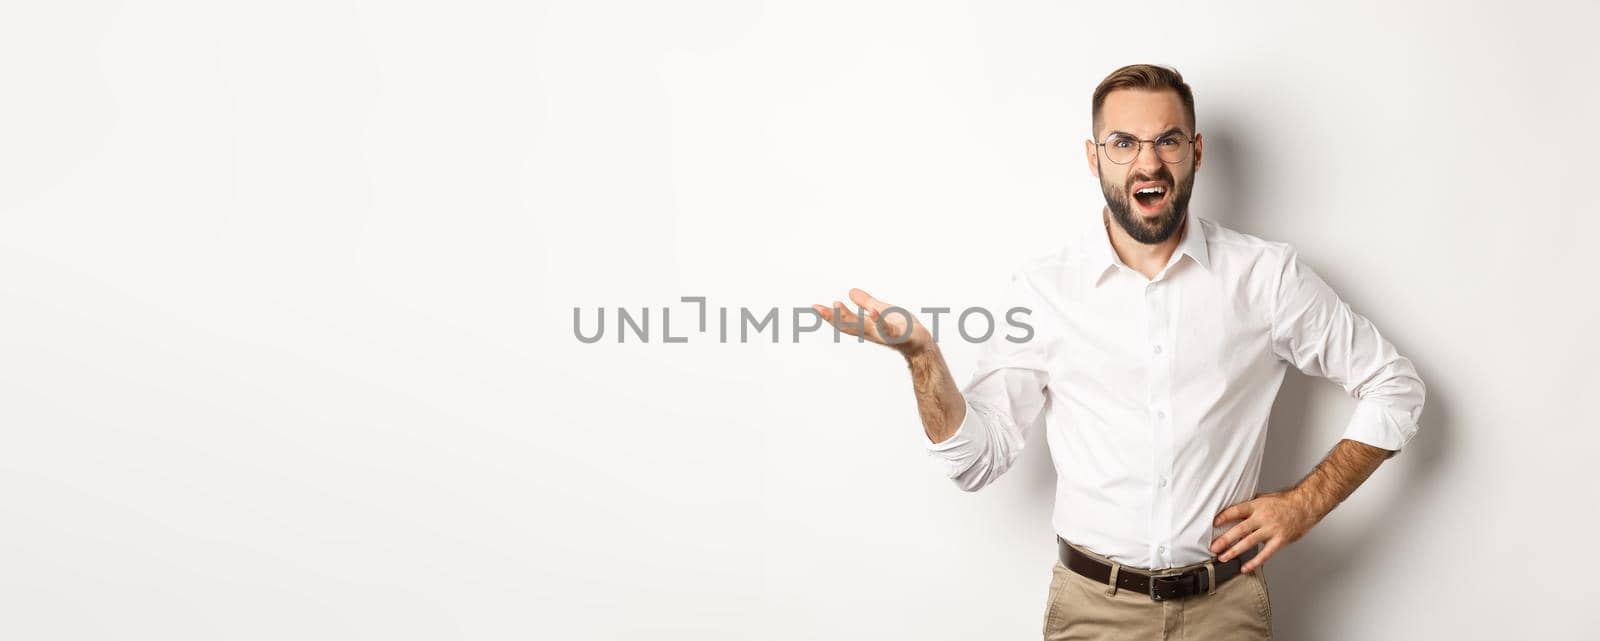 Frustrated office worker complaining, gesturing and looking disappointed, standing over white background.